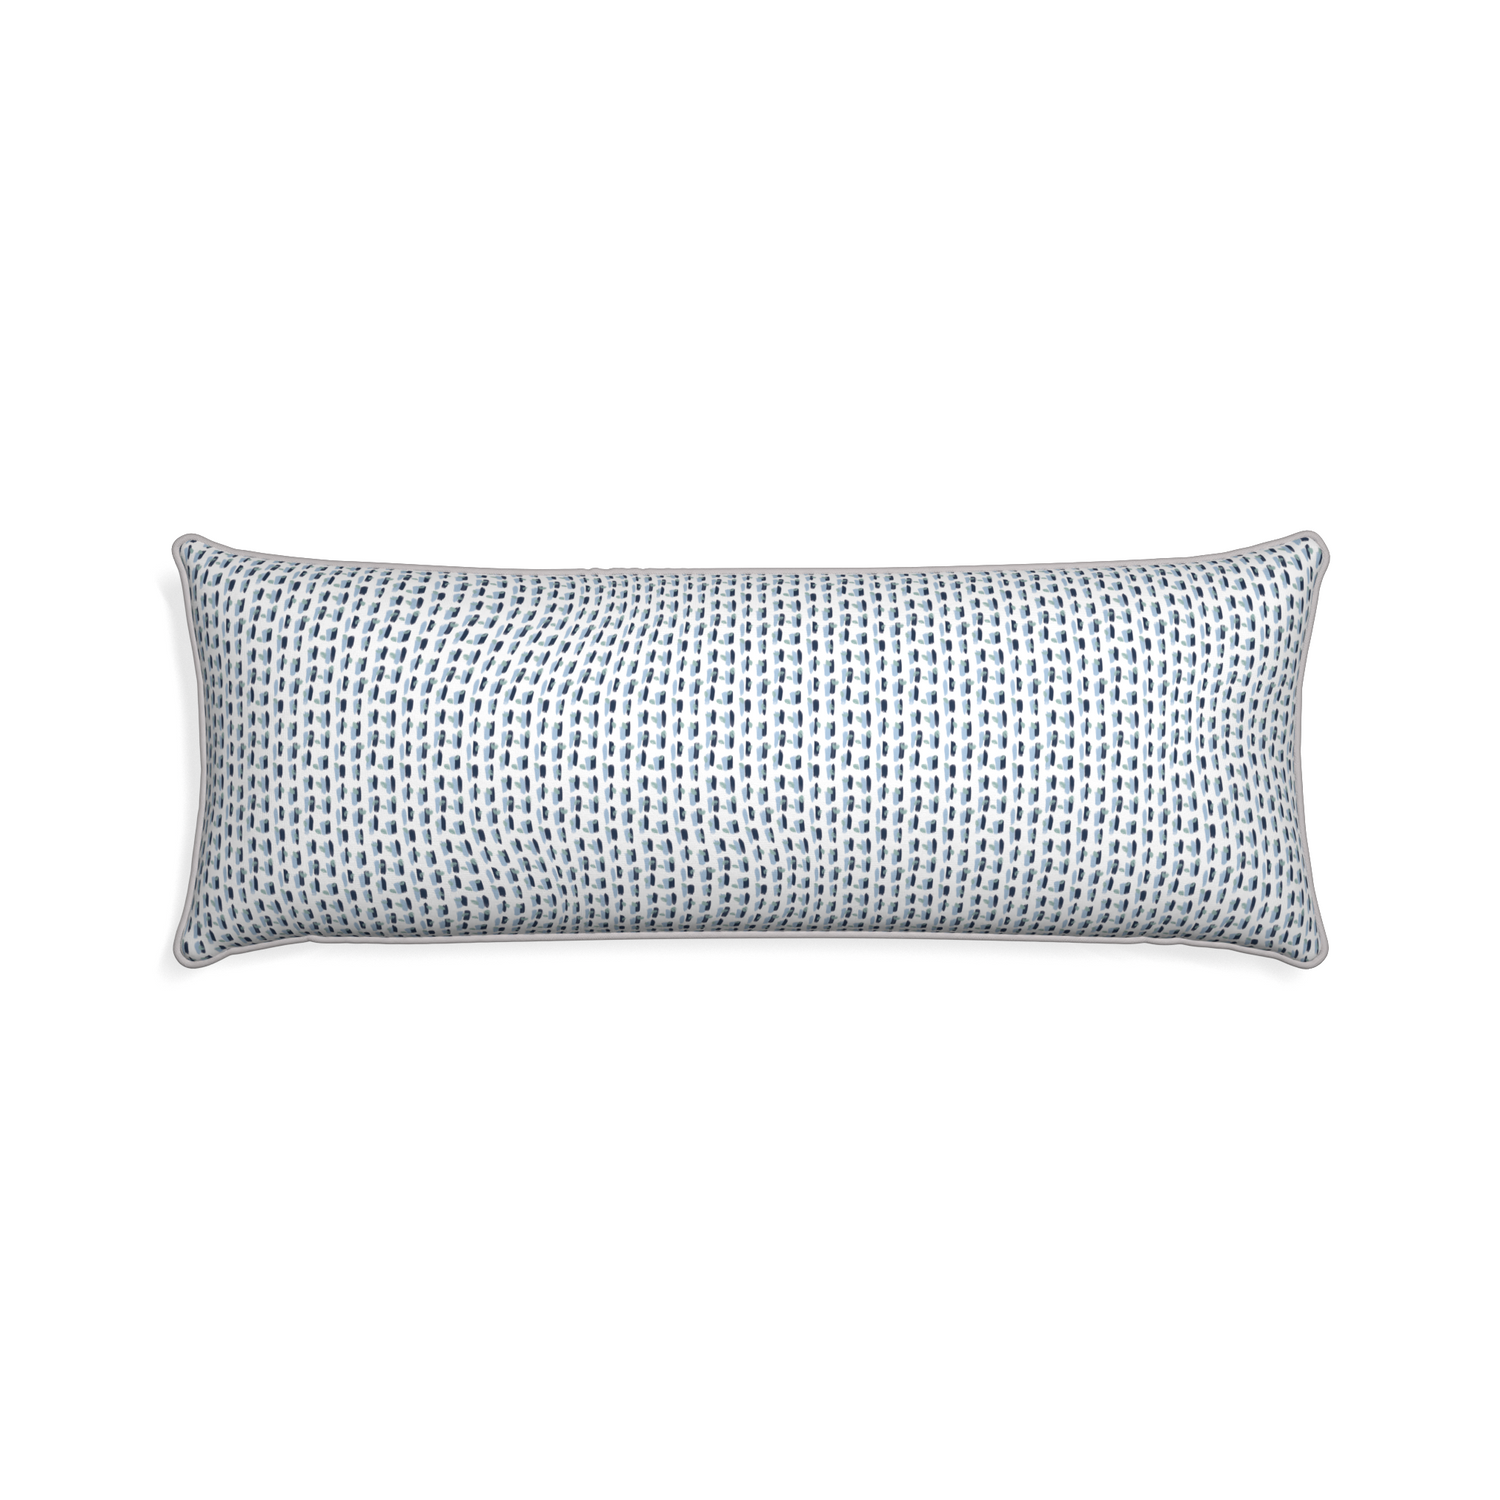 Xl-lumbar poppy blue custom pillow with pebble piping on white background